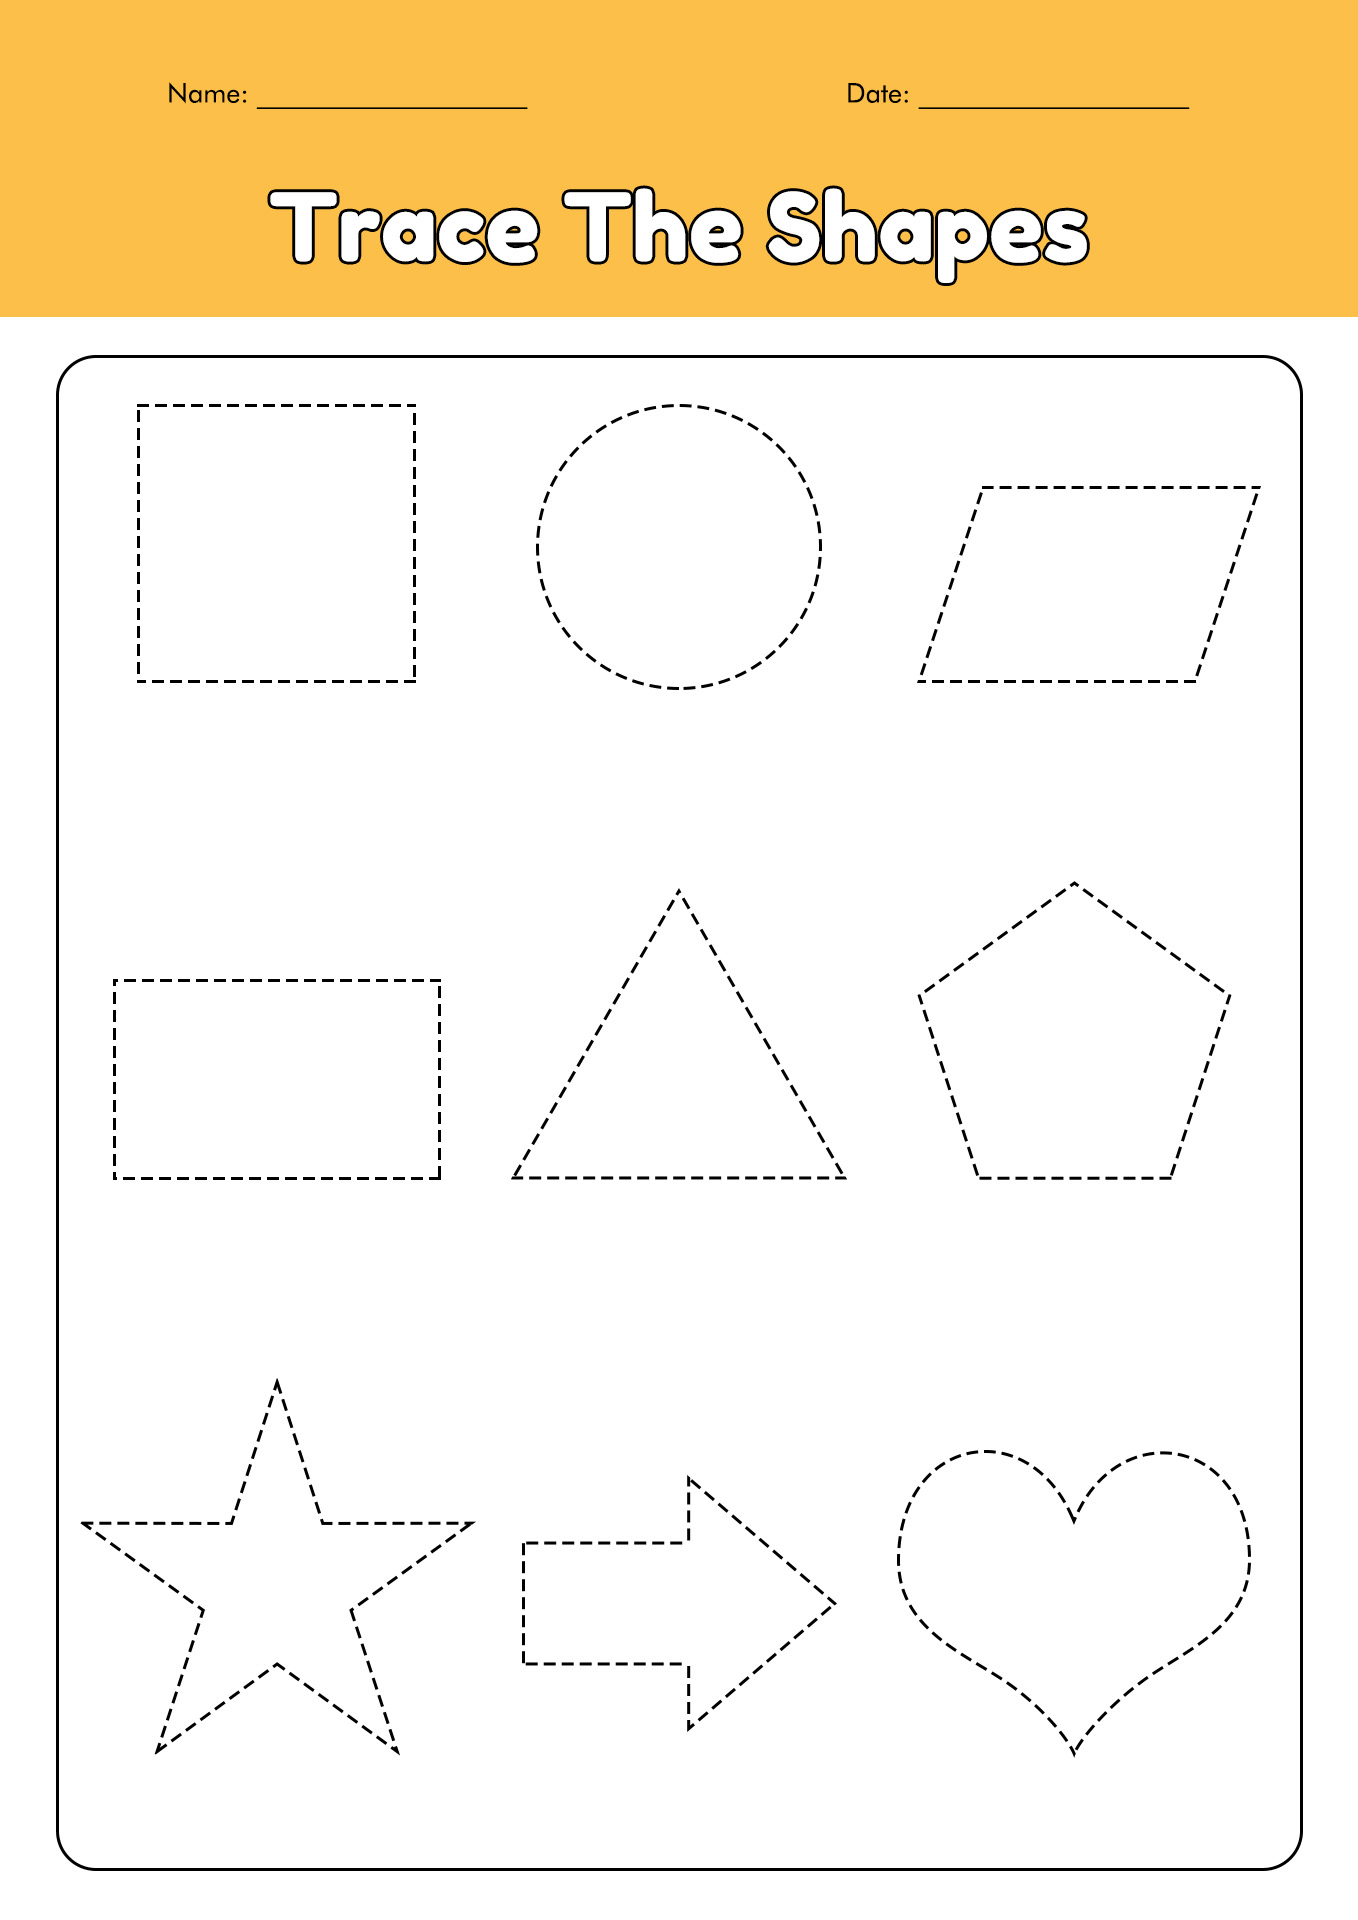 Dotted Tracing Shapes Worksheets Image